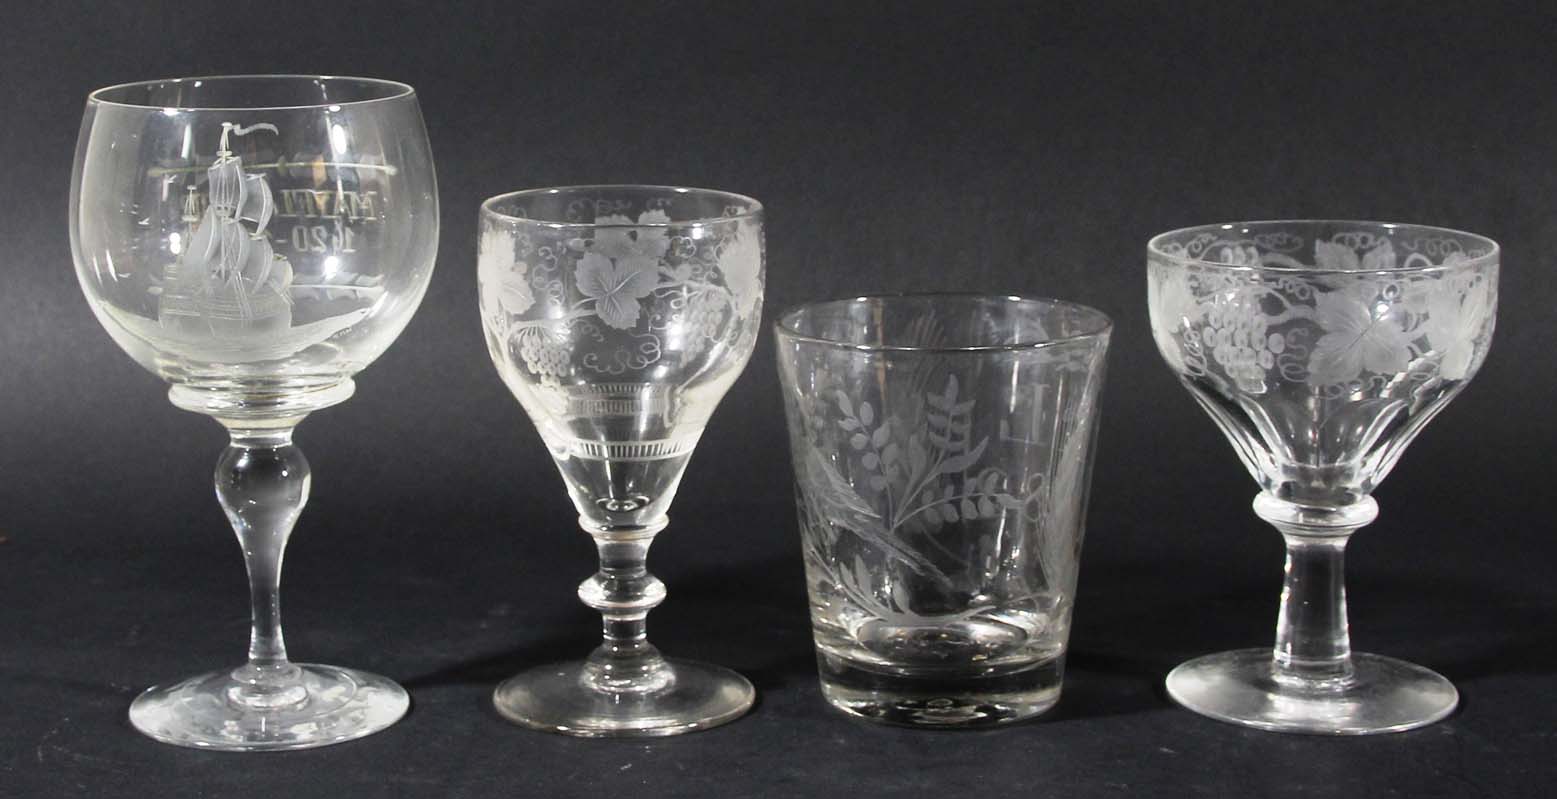 PARCEL OF GLASSWARE, 18th to 20th century, to include a Mayflower goblet, wine glasses and